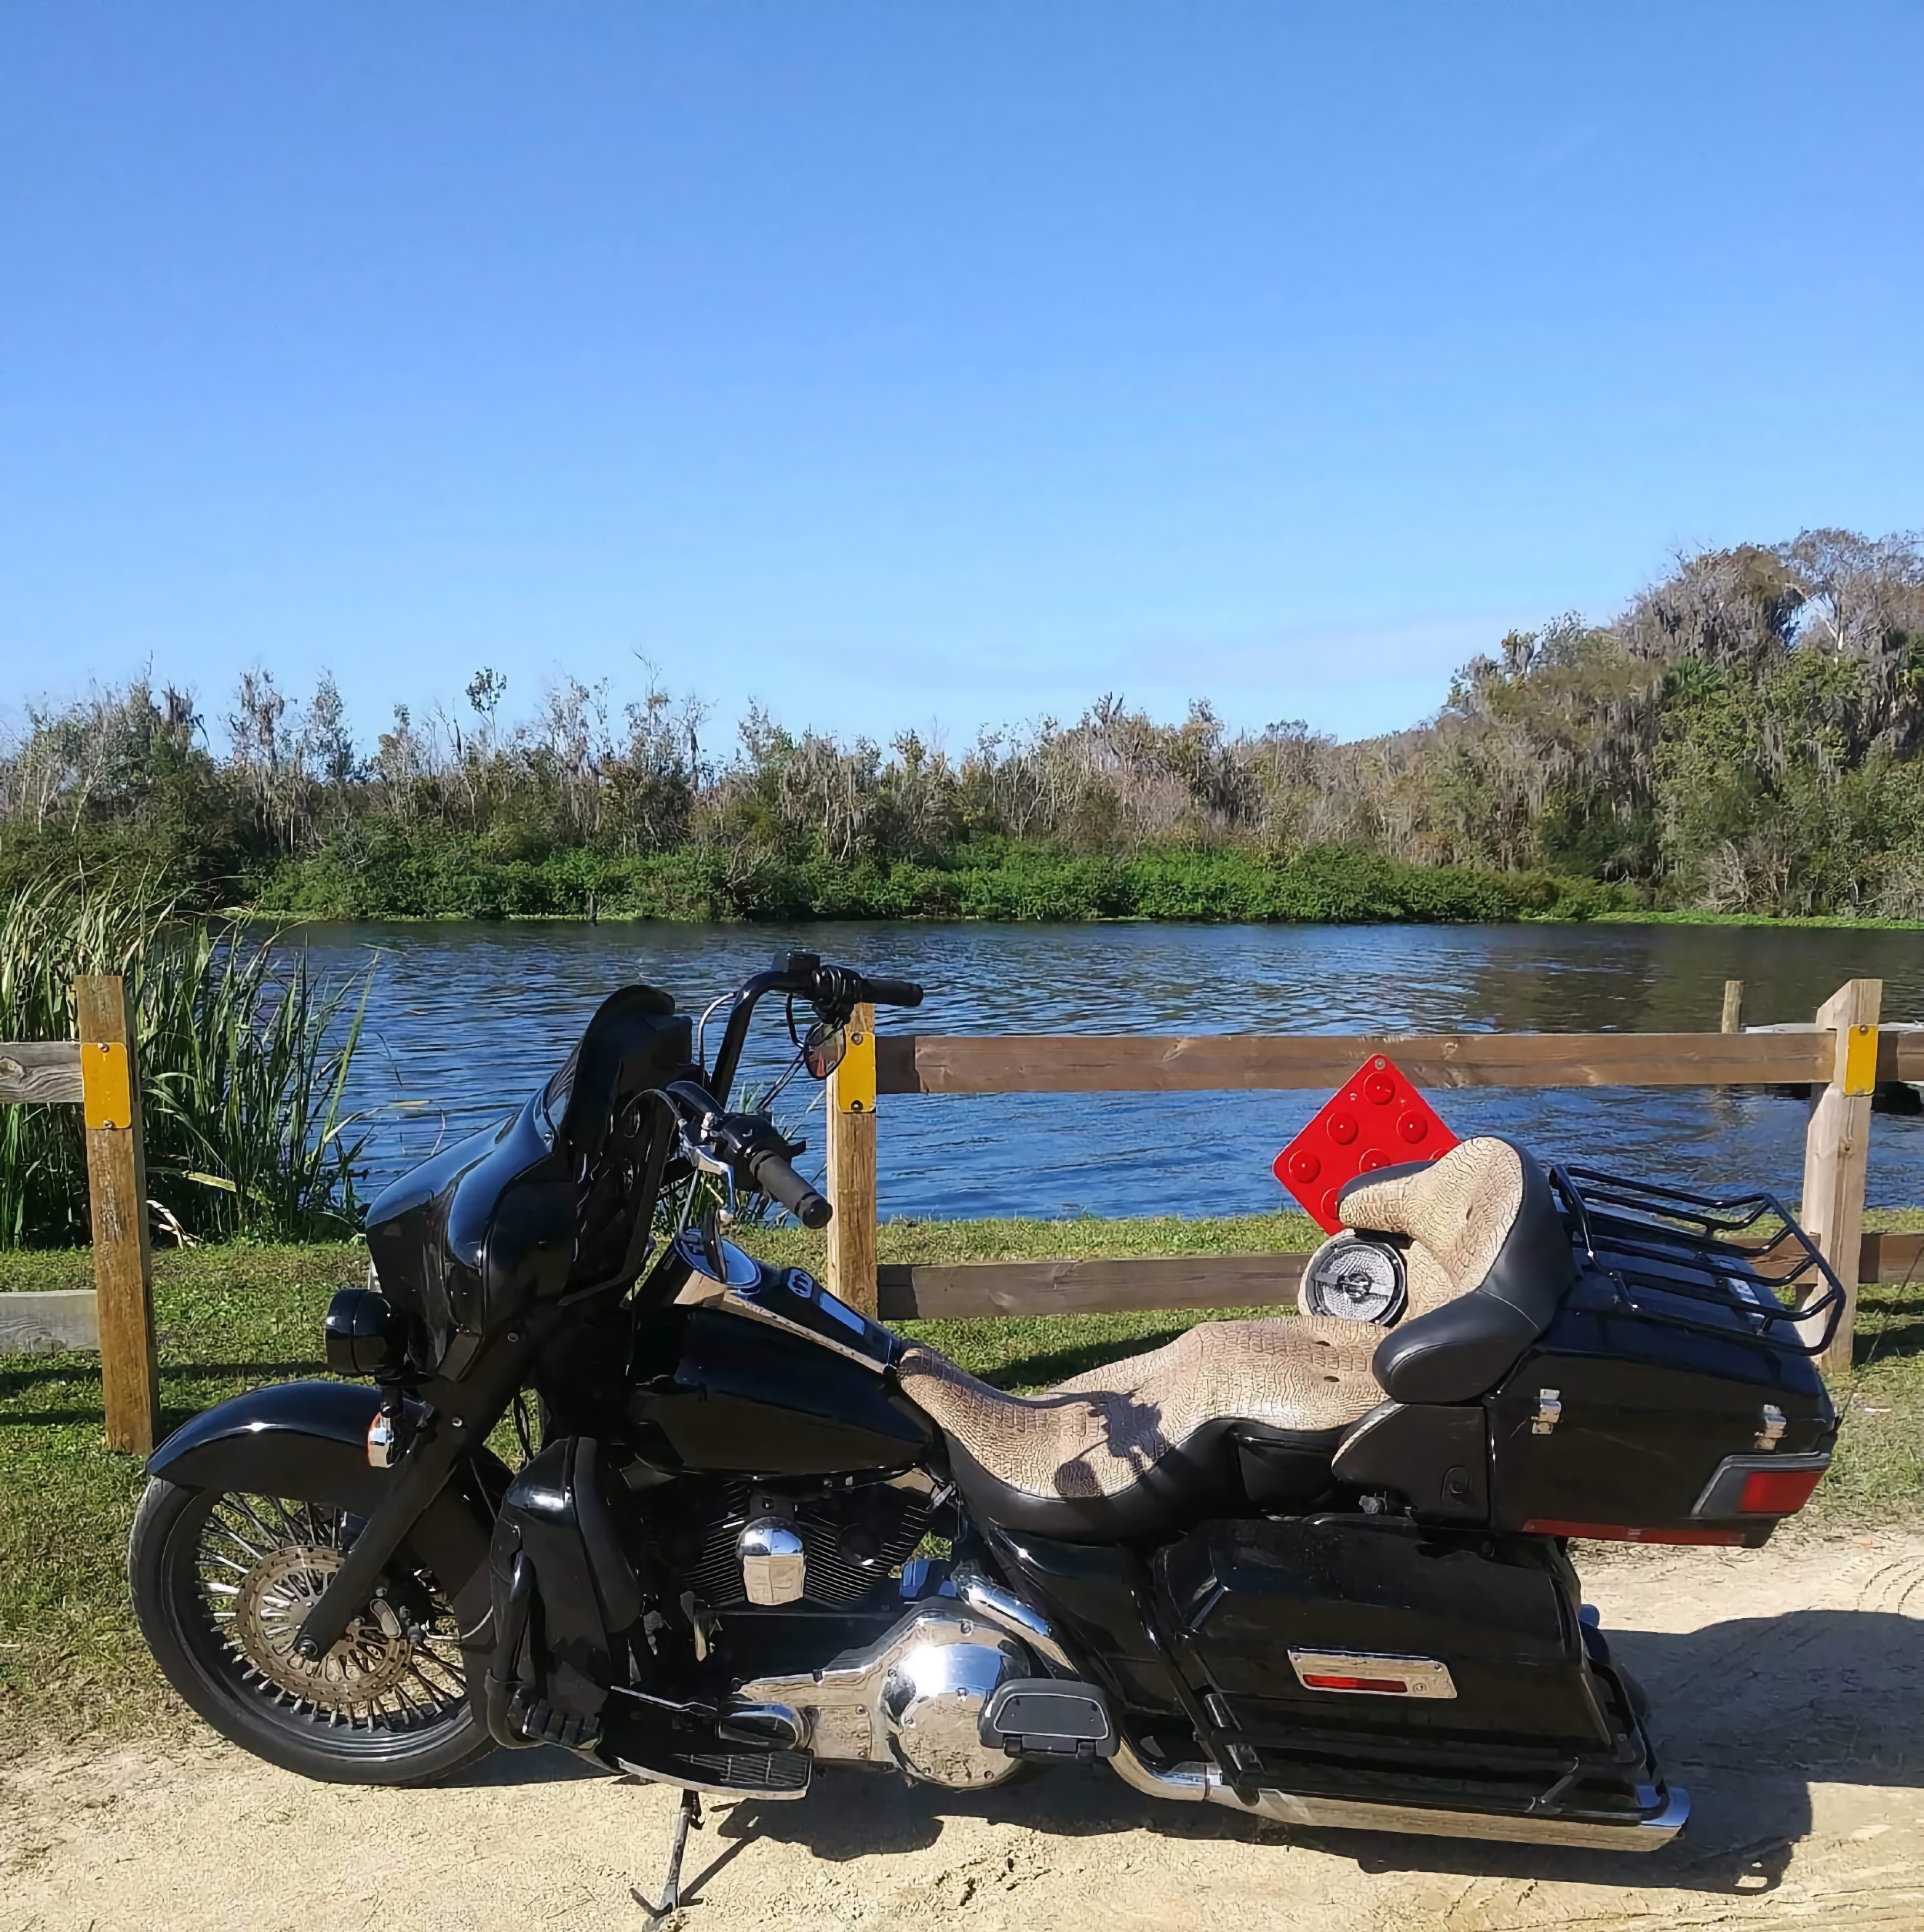 Black motorcycle siting in front of a wooden fence with a lake behind the fense